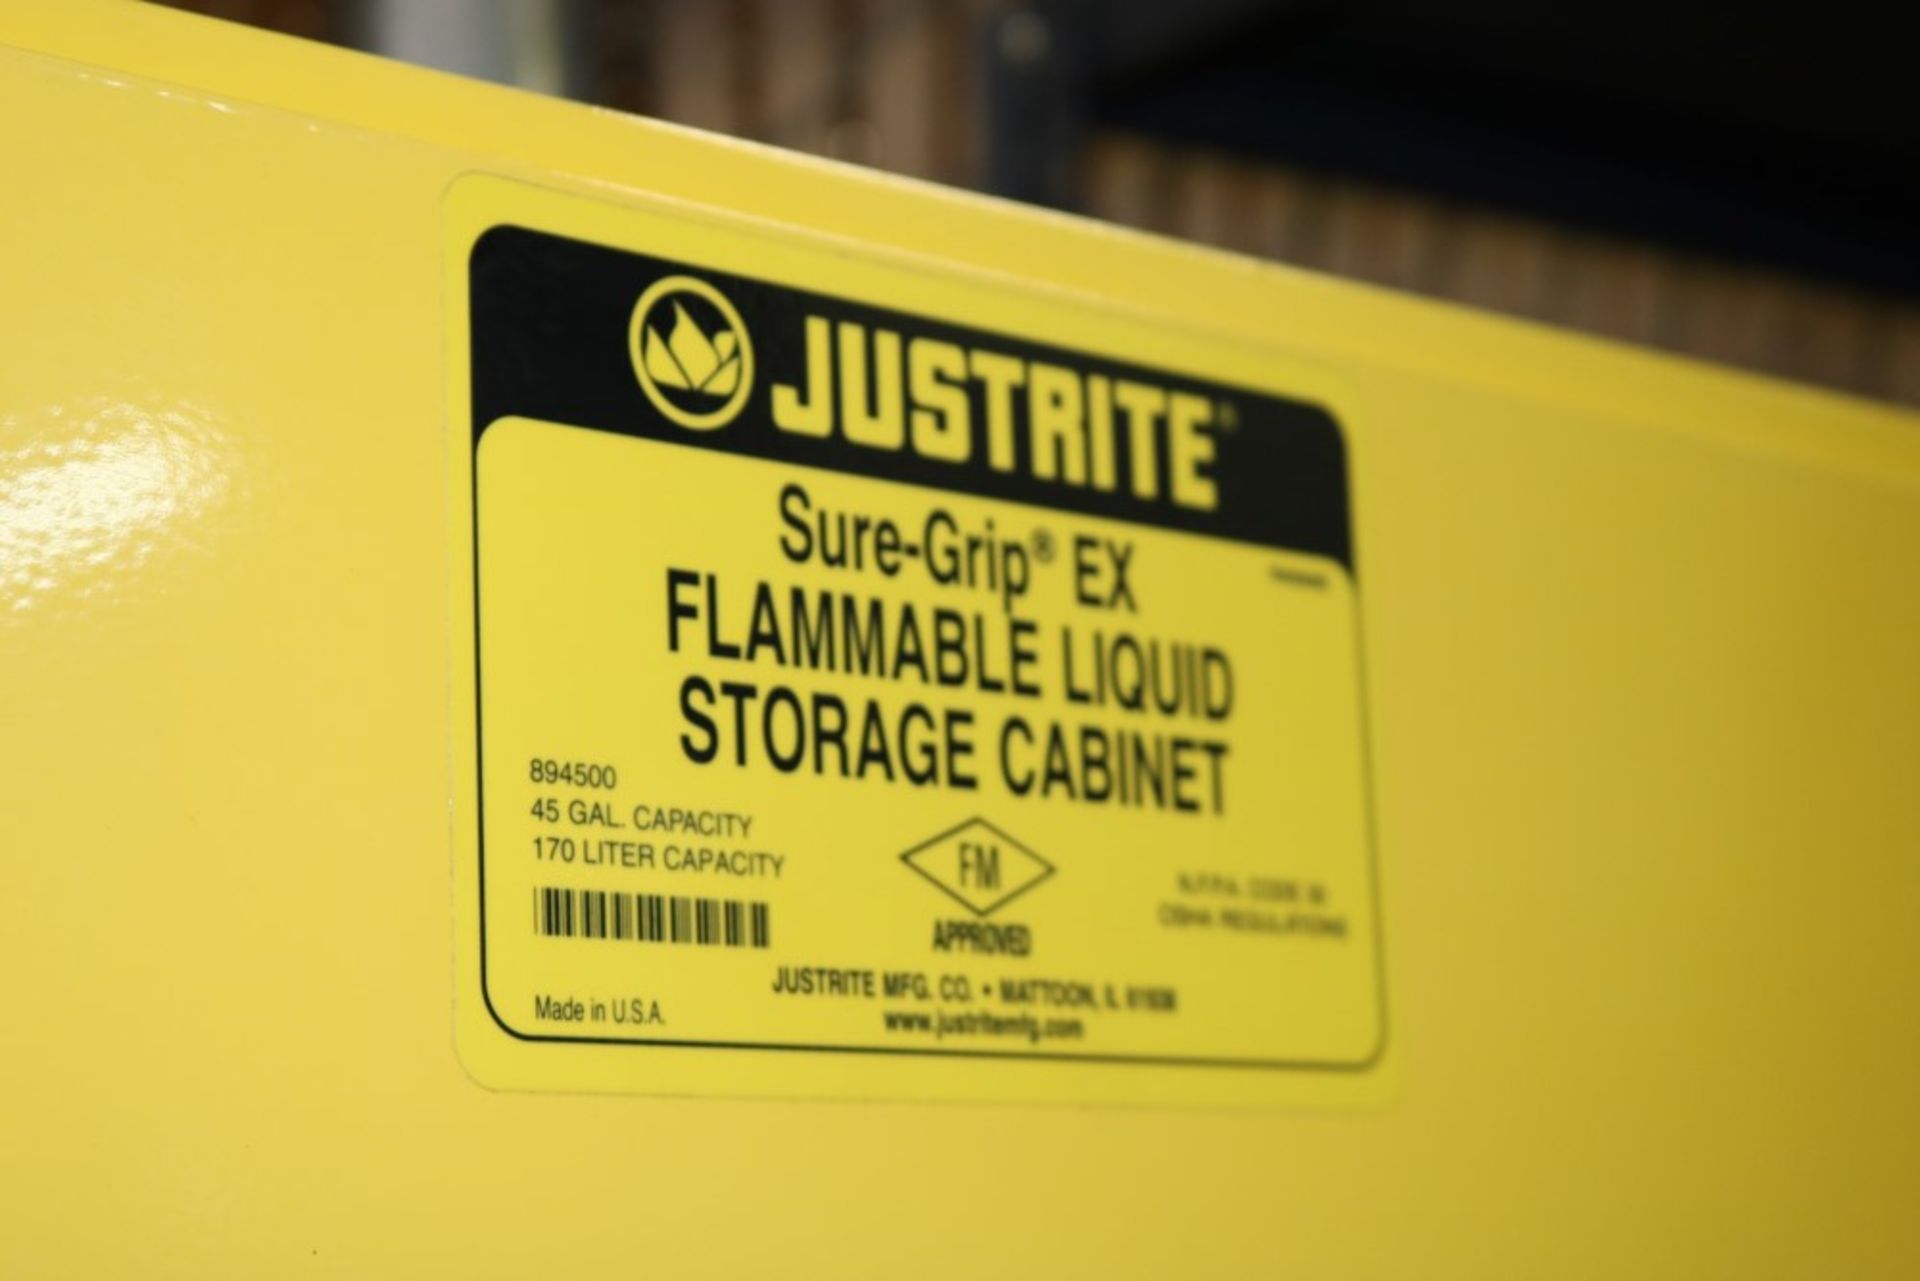 Like New - Justrite Flammable Storage Cabinet 45 gallon capacity - Image 3 of 6